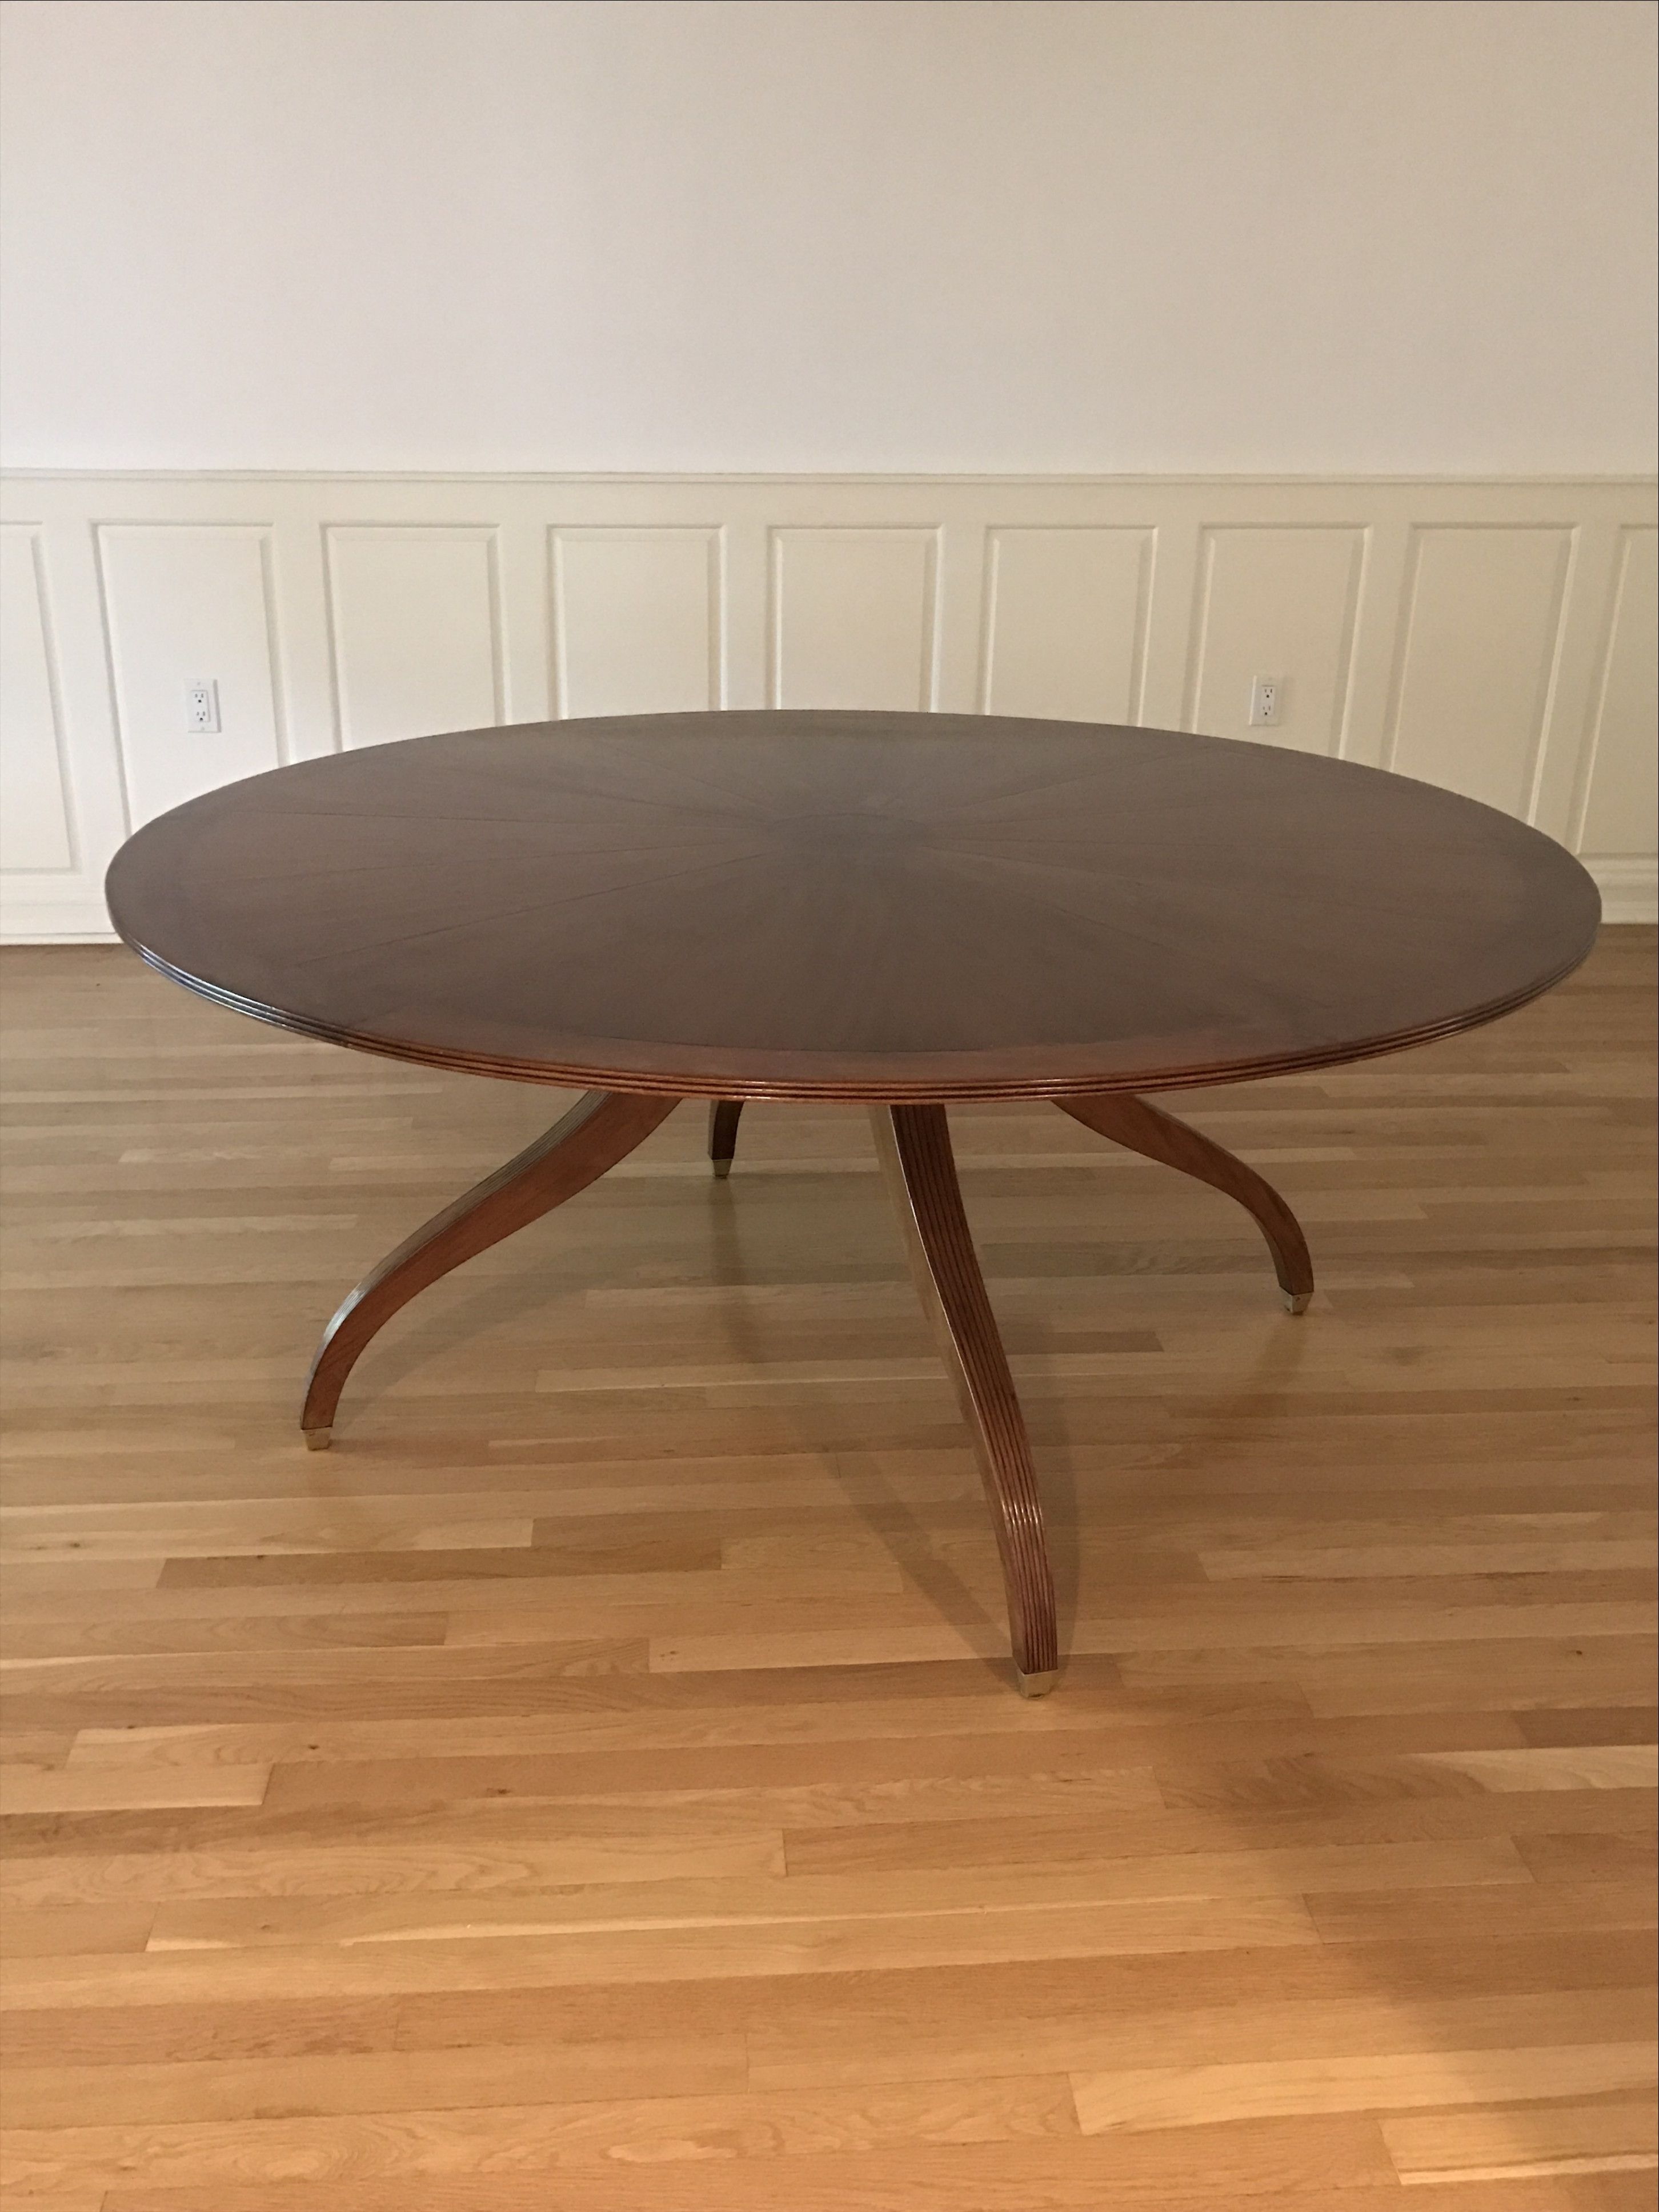 Most Recently Released Lyre Coffee Tables Pertaining To Cyrano Coffee Table Elegant The Viola Table The Lyre Table Rethought (Gallery 9 of 20)